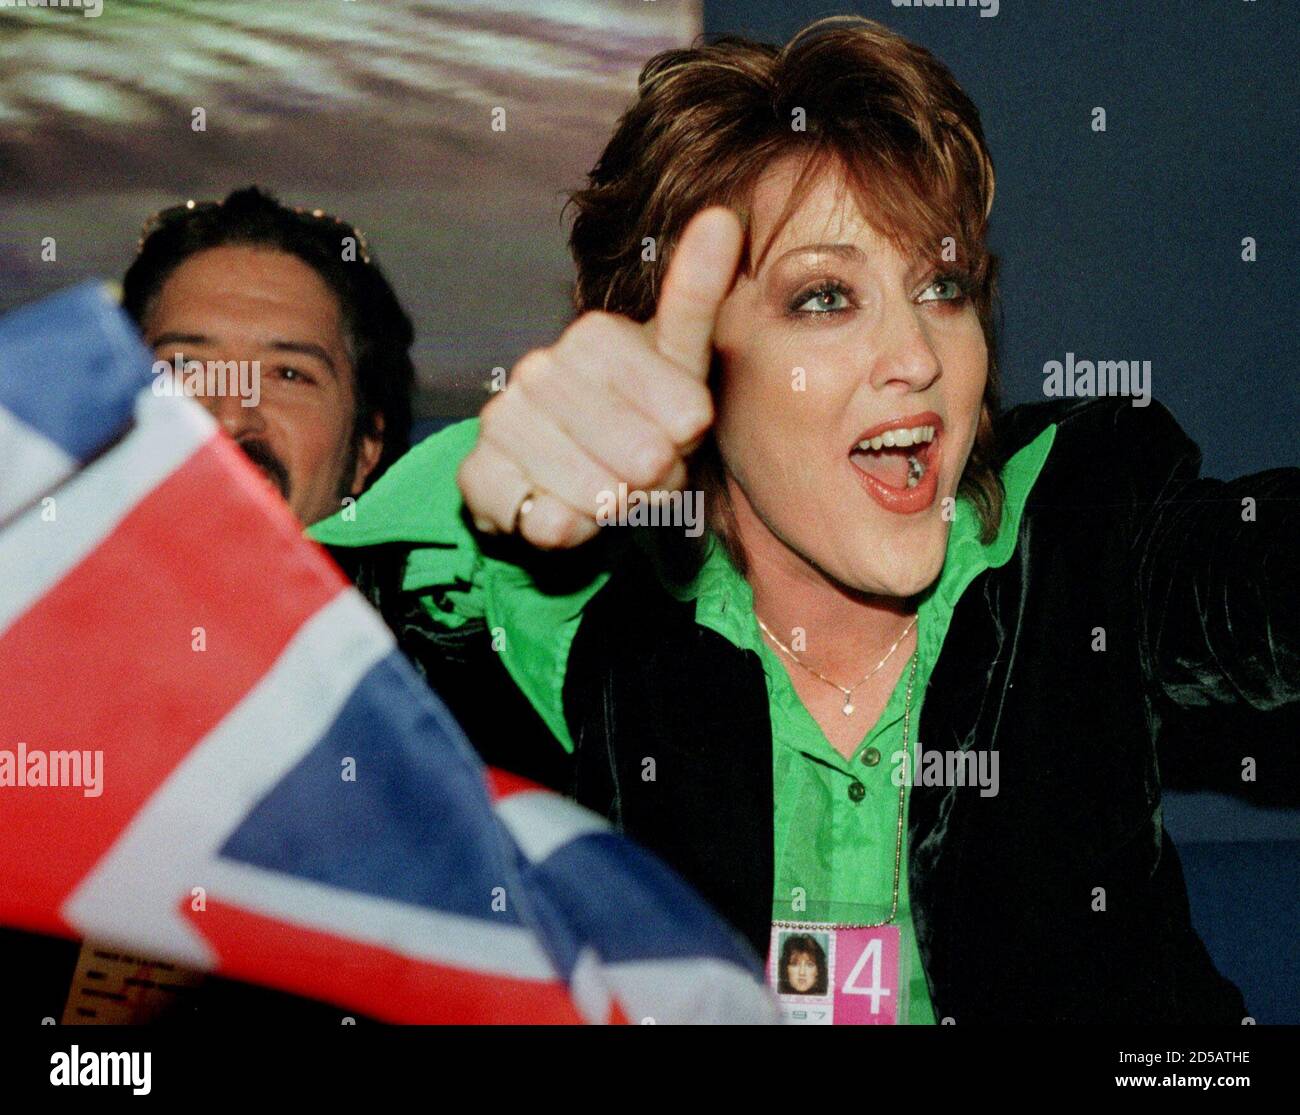 Katrina of Katrina and the waves, representing the United Kingdom  celebrates after winning the Eurovision Song Contest 1997 with her song Love  shine a light written by Kimberly Rew, May 3. Katrina